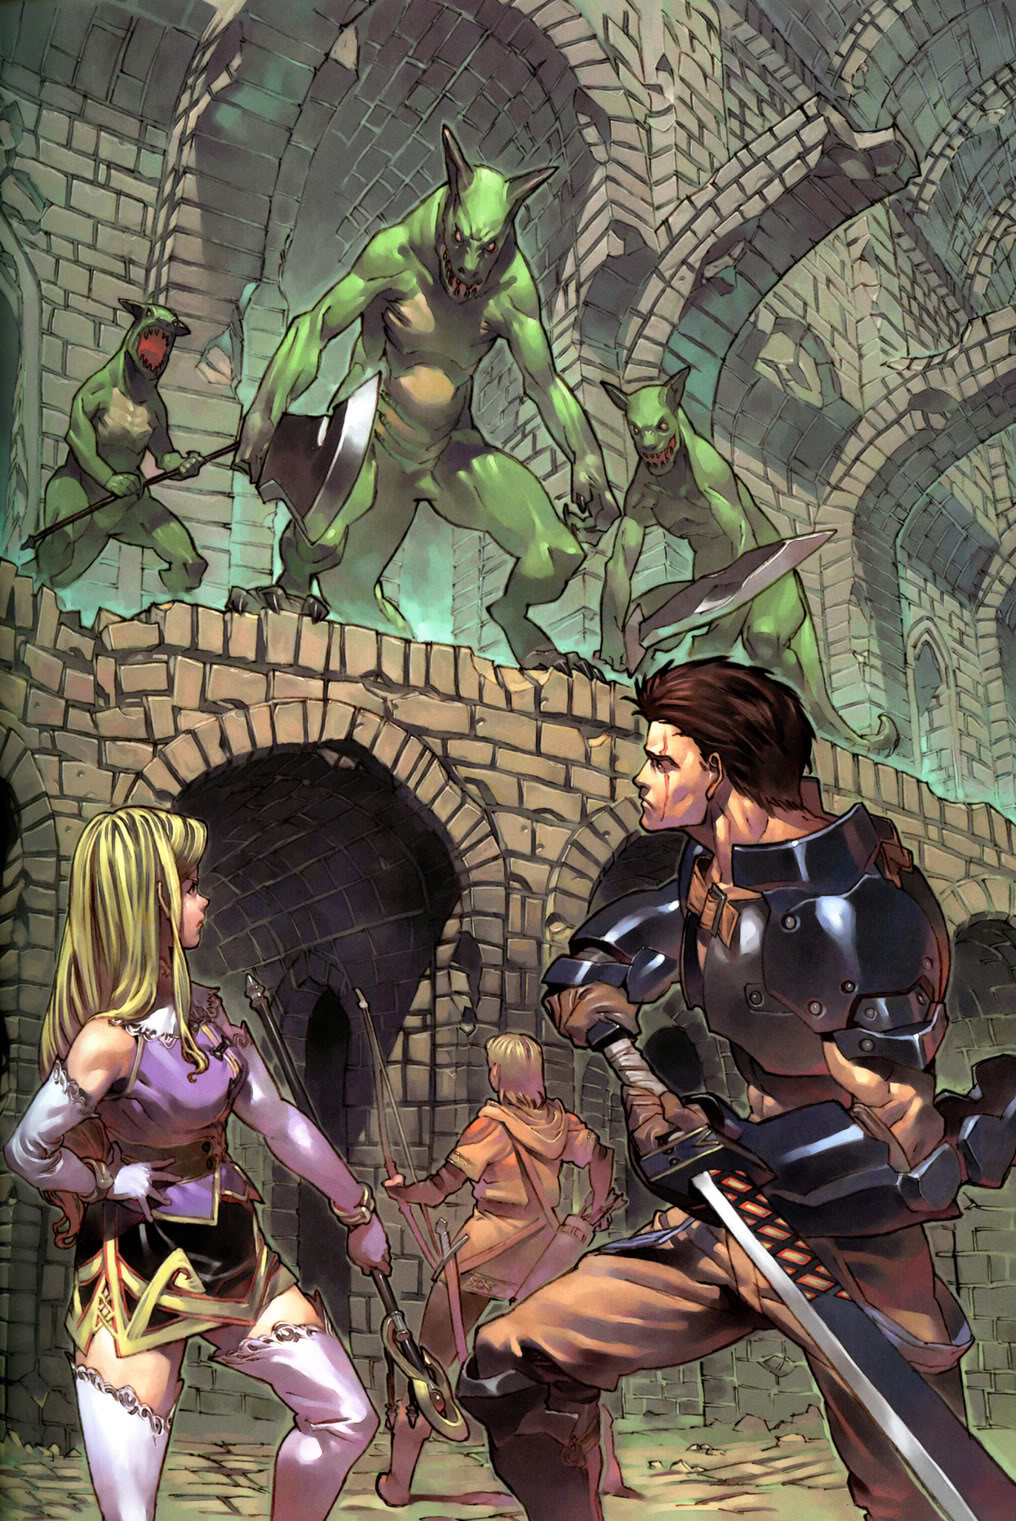 1boy 1girl 2boys armor arngrim blonde_hair bow brown_hair character_request dungeon highres monster multiple_boys mystina official_art quiver scar short_hair sword tagme thigh-highs valkyrie_profile weapon yoshinari_you zettai_ryouiki